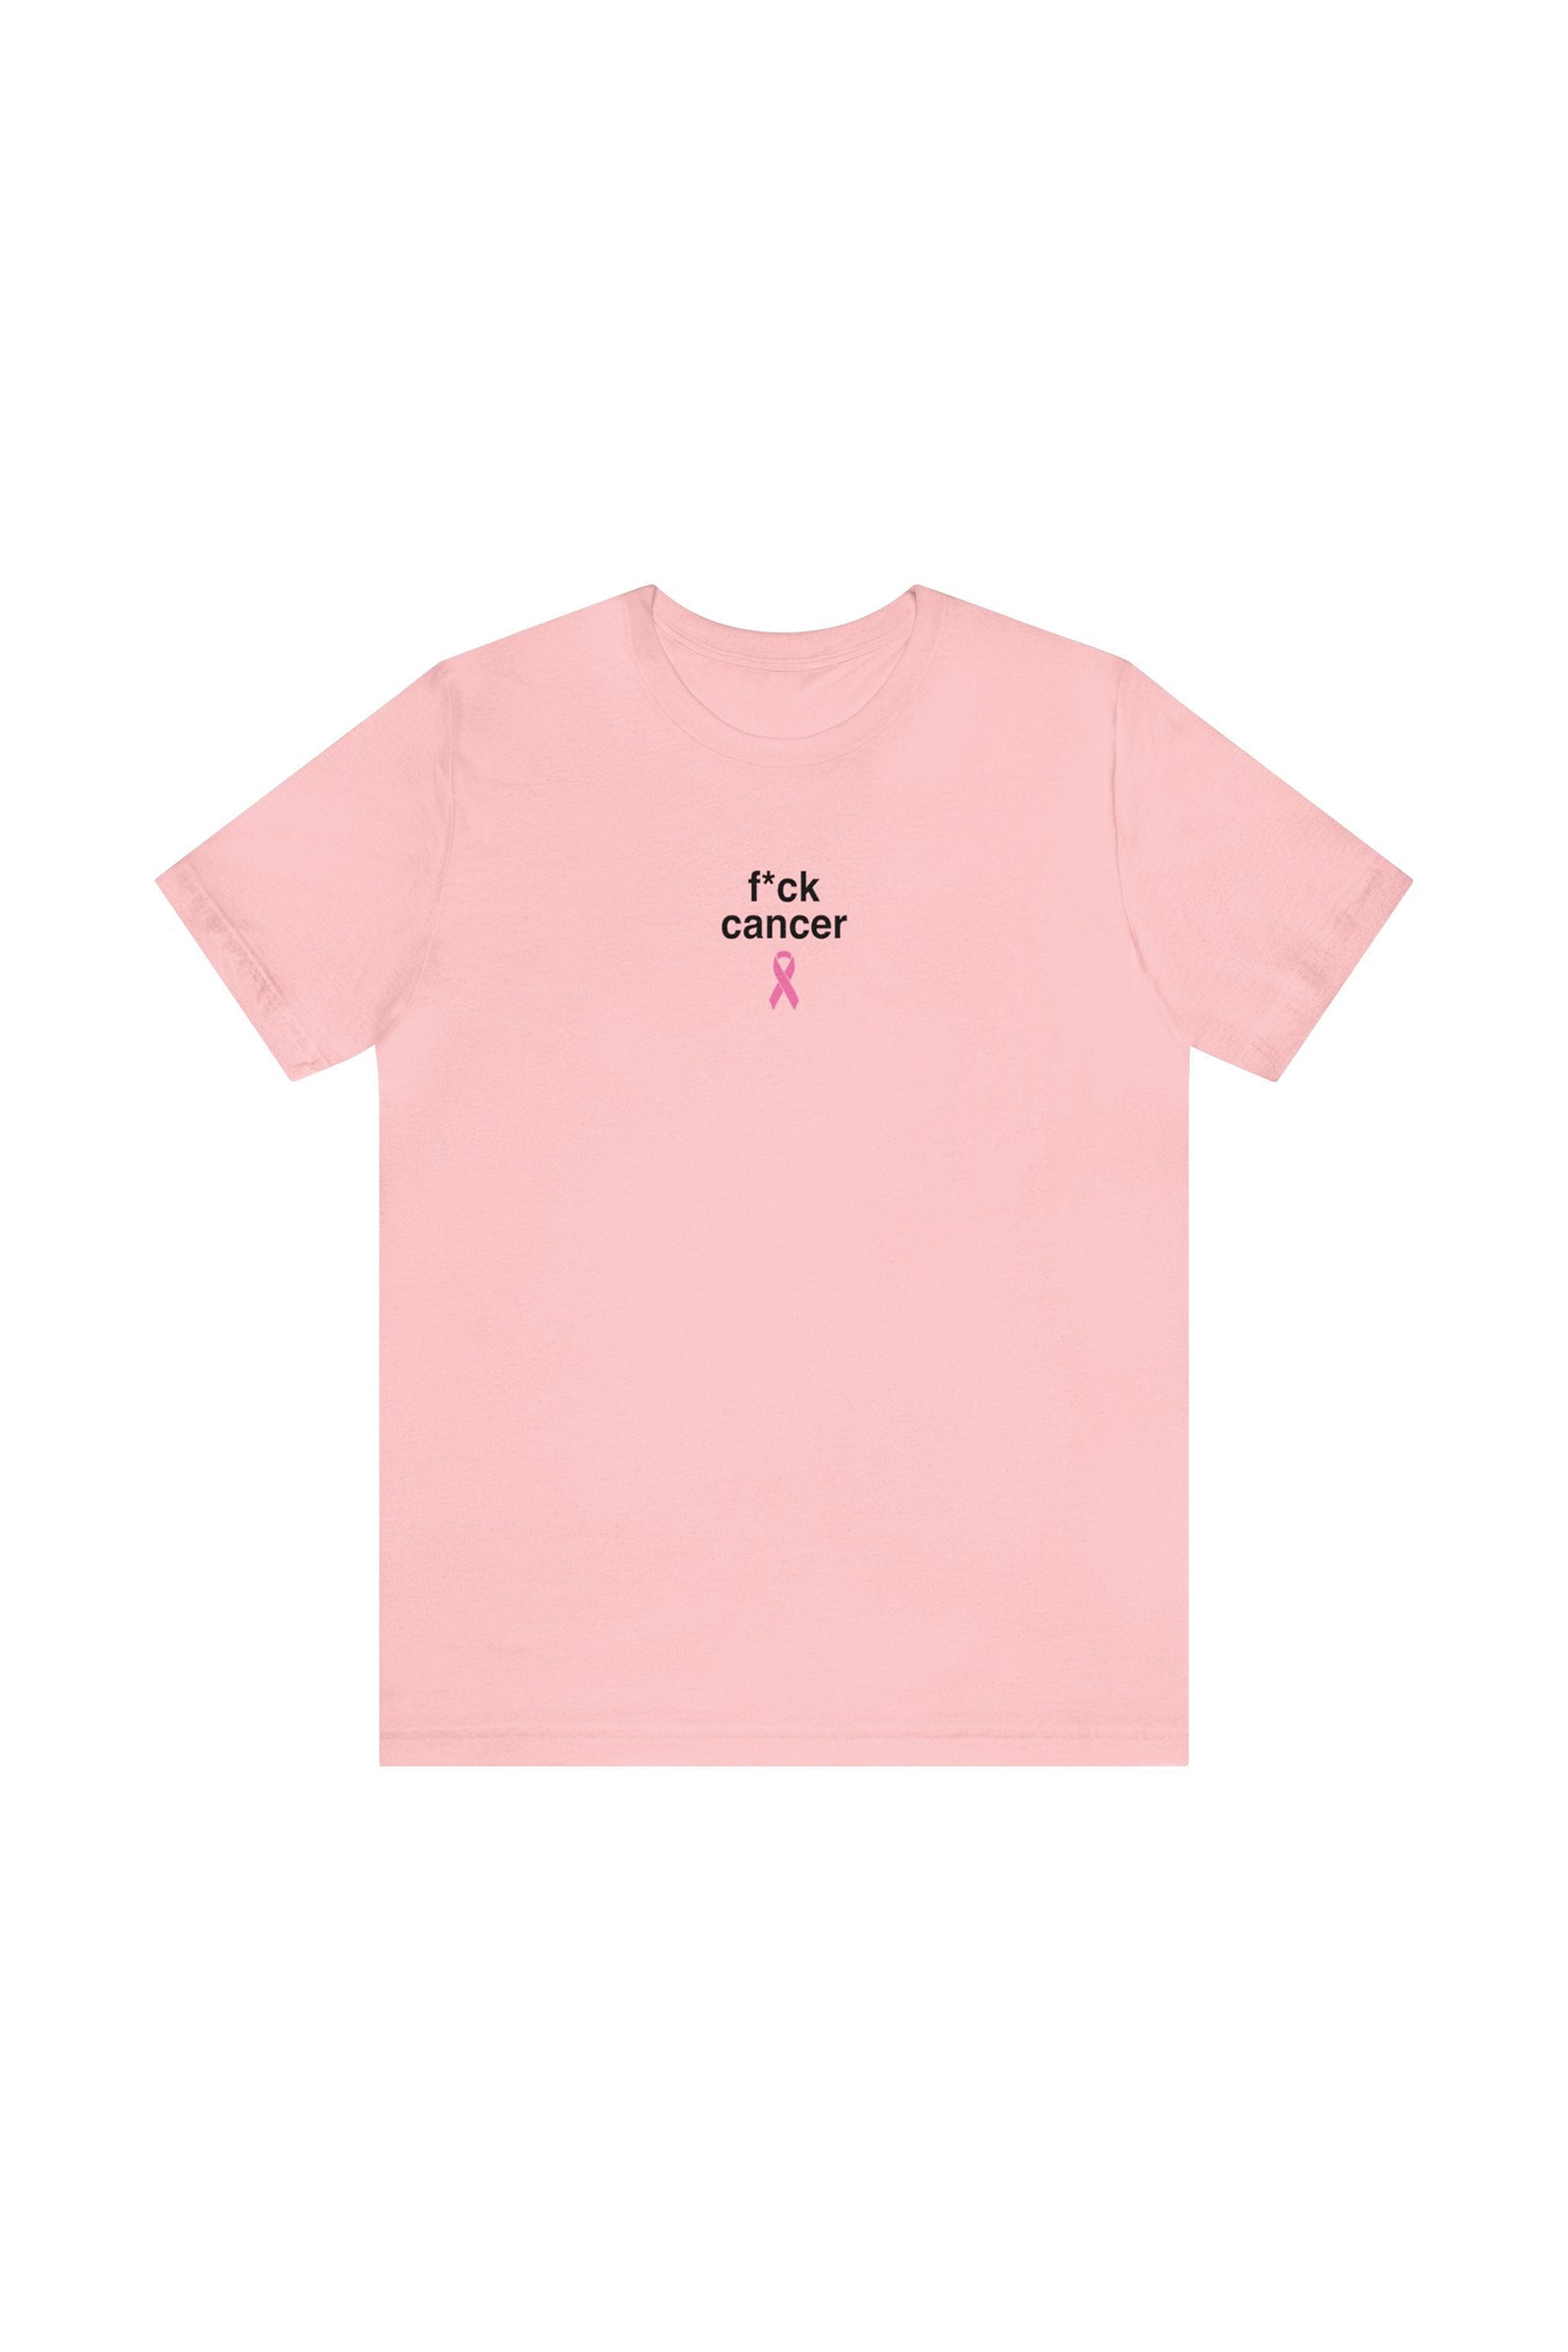 Image of "F*CK CANCER" T-Shirt